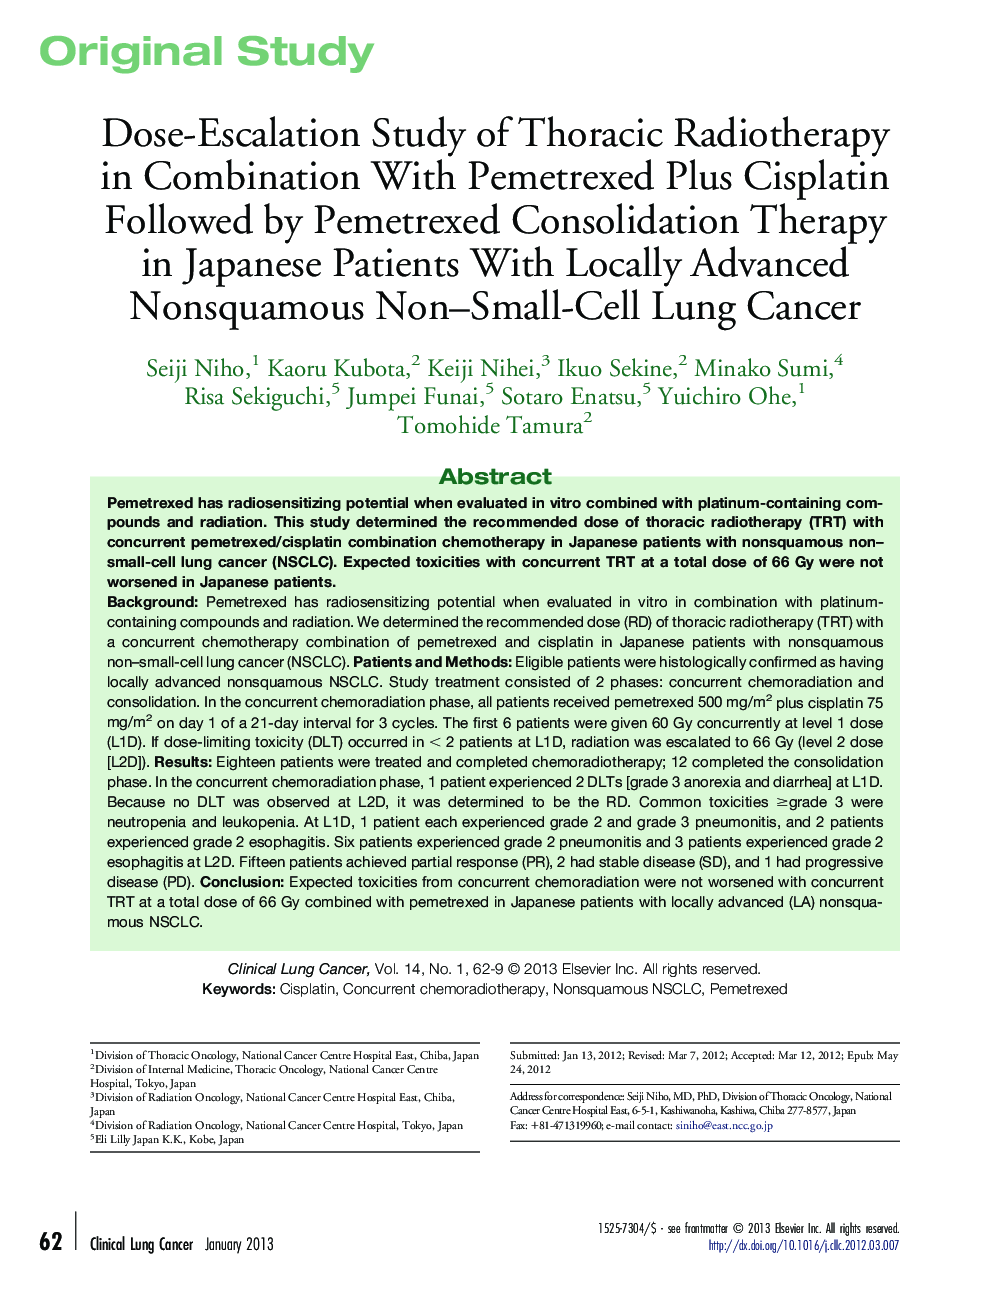 Dose-Escalation Study of Thoracic Radiotherapy in Combination With Pemetrexed Plus Cisplatin Followed by Pemetrexed Consolidation Therapy in Japanese Patients With Locally Advanced Nonsquamous Non–Small-Cell Lung Cancer